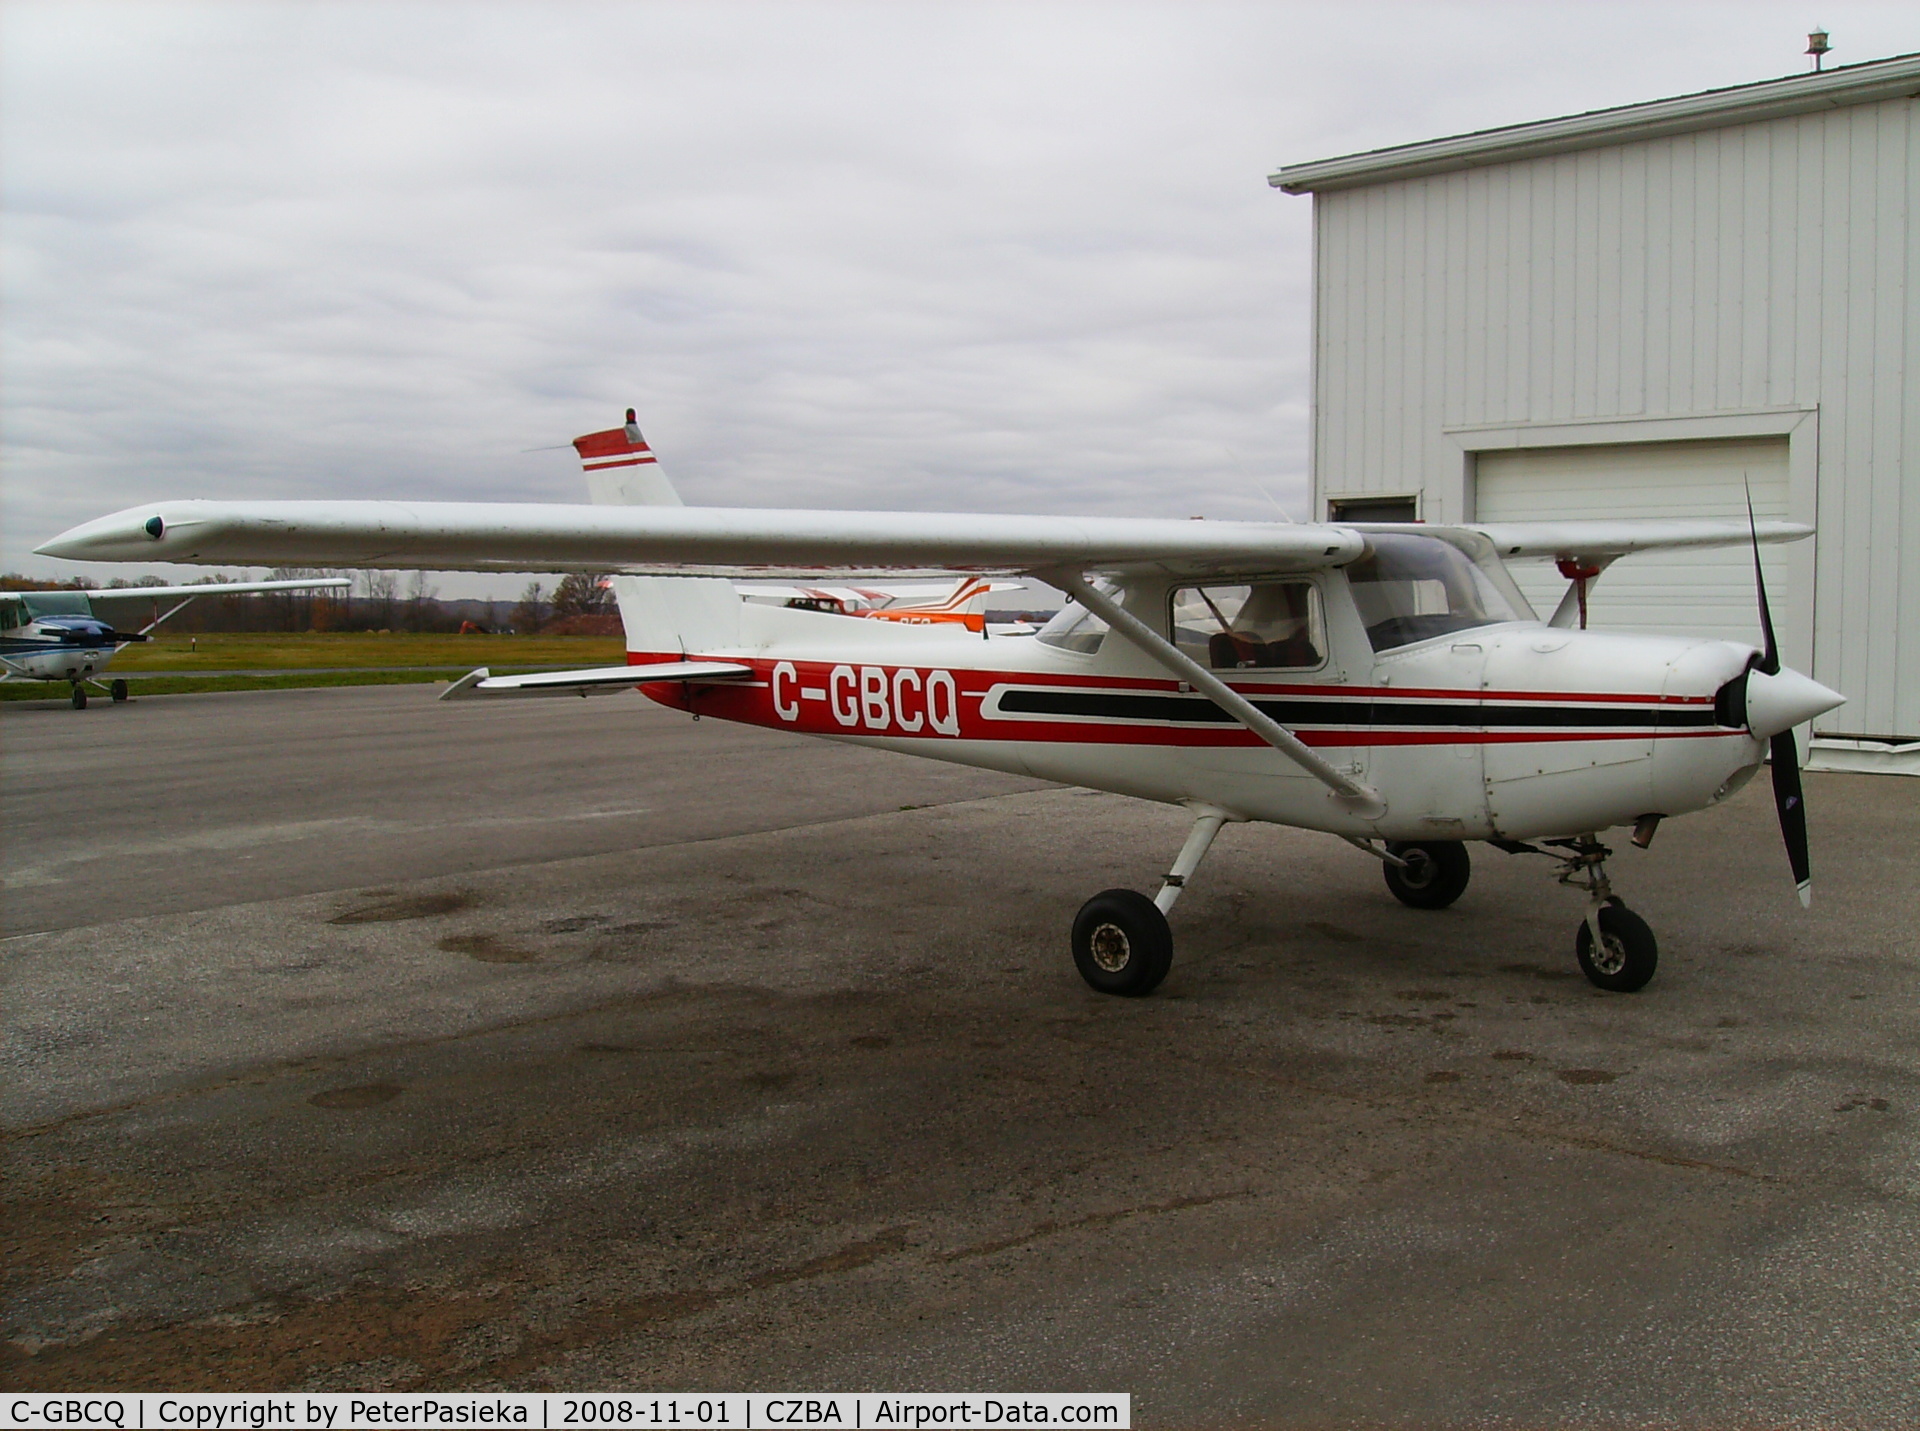 C-GBCQ, 1980 Cessna 152 C/N 15284436, Spectrum Airways training aircraft, Burlington Airport, Ontario Canada. I did my first solo on this aircraft in the summer of 1993!!!